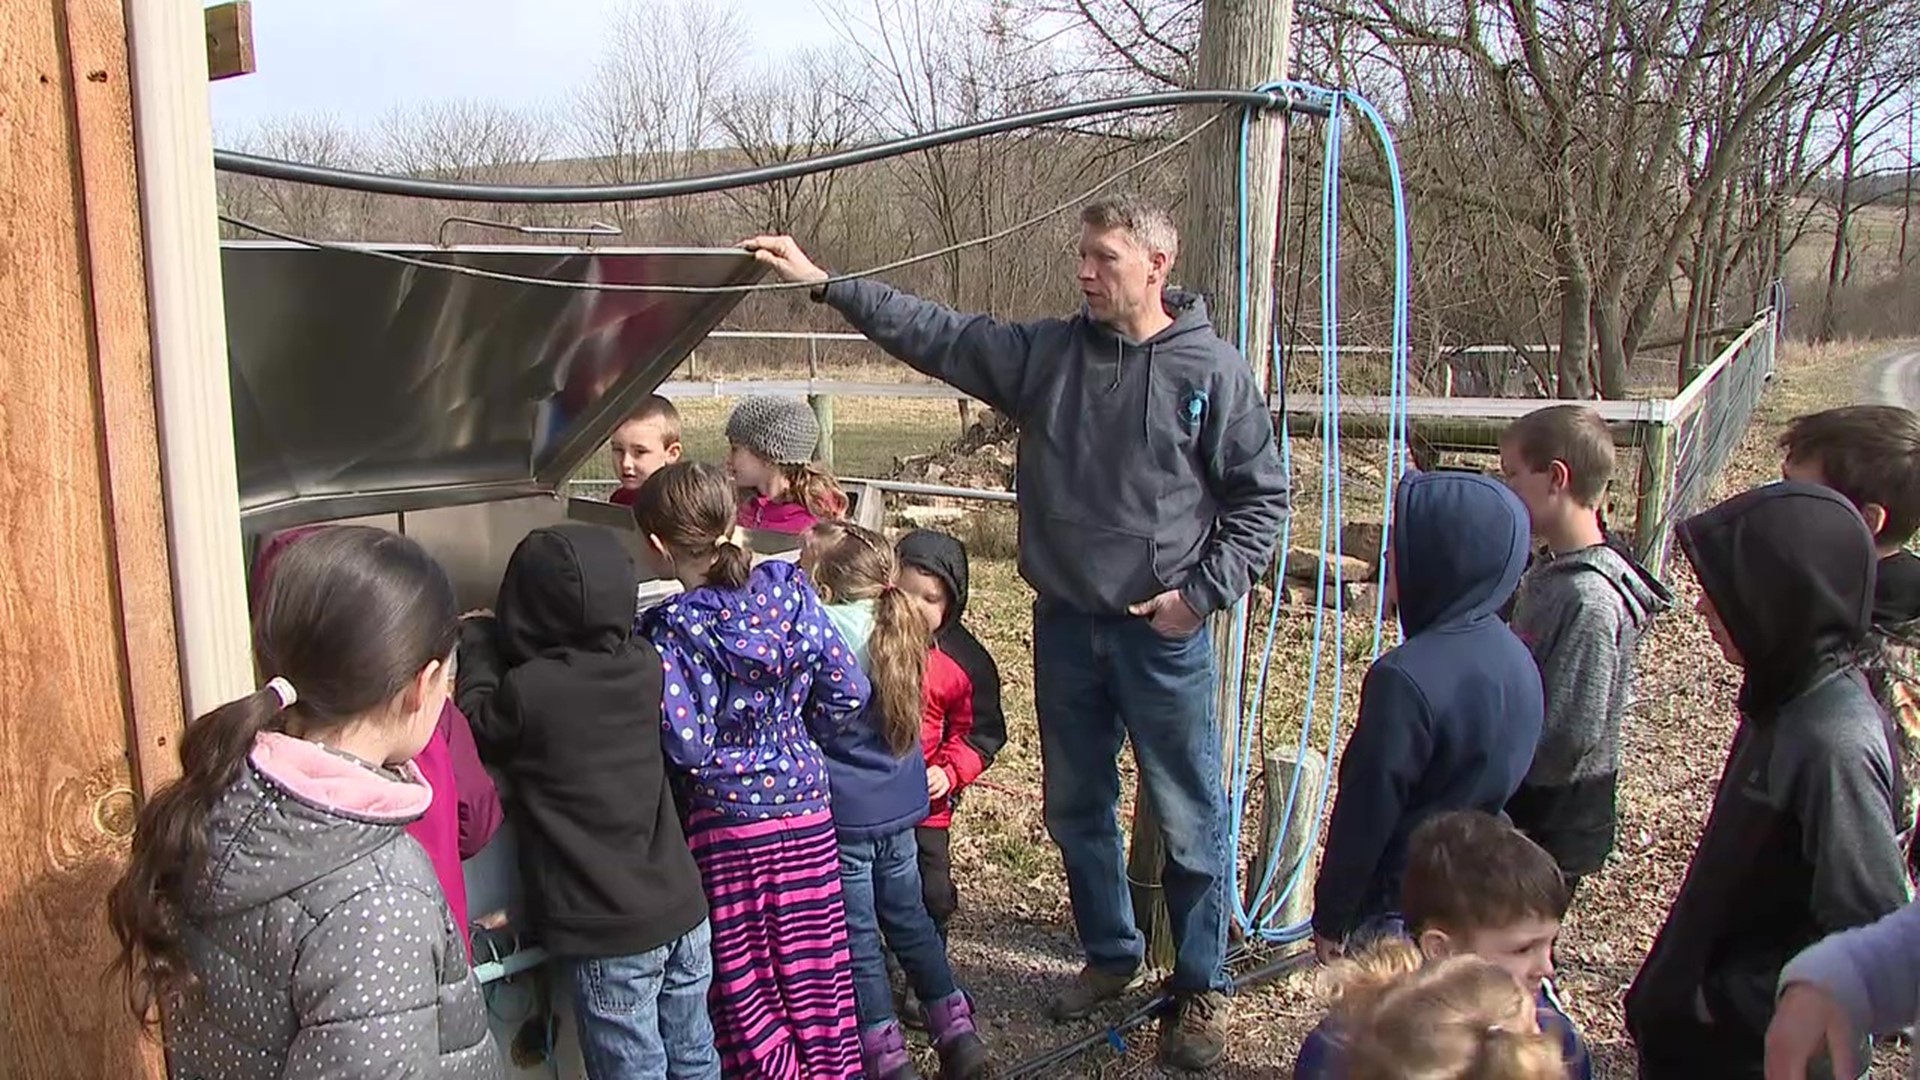 Maple syrup season is coming to a close in one part of Snyder County, but not before some students had the chance to see how it all works.